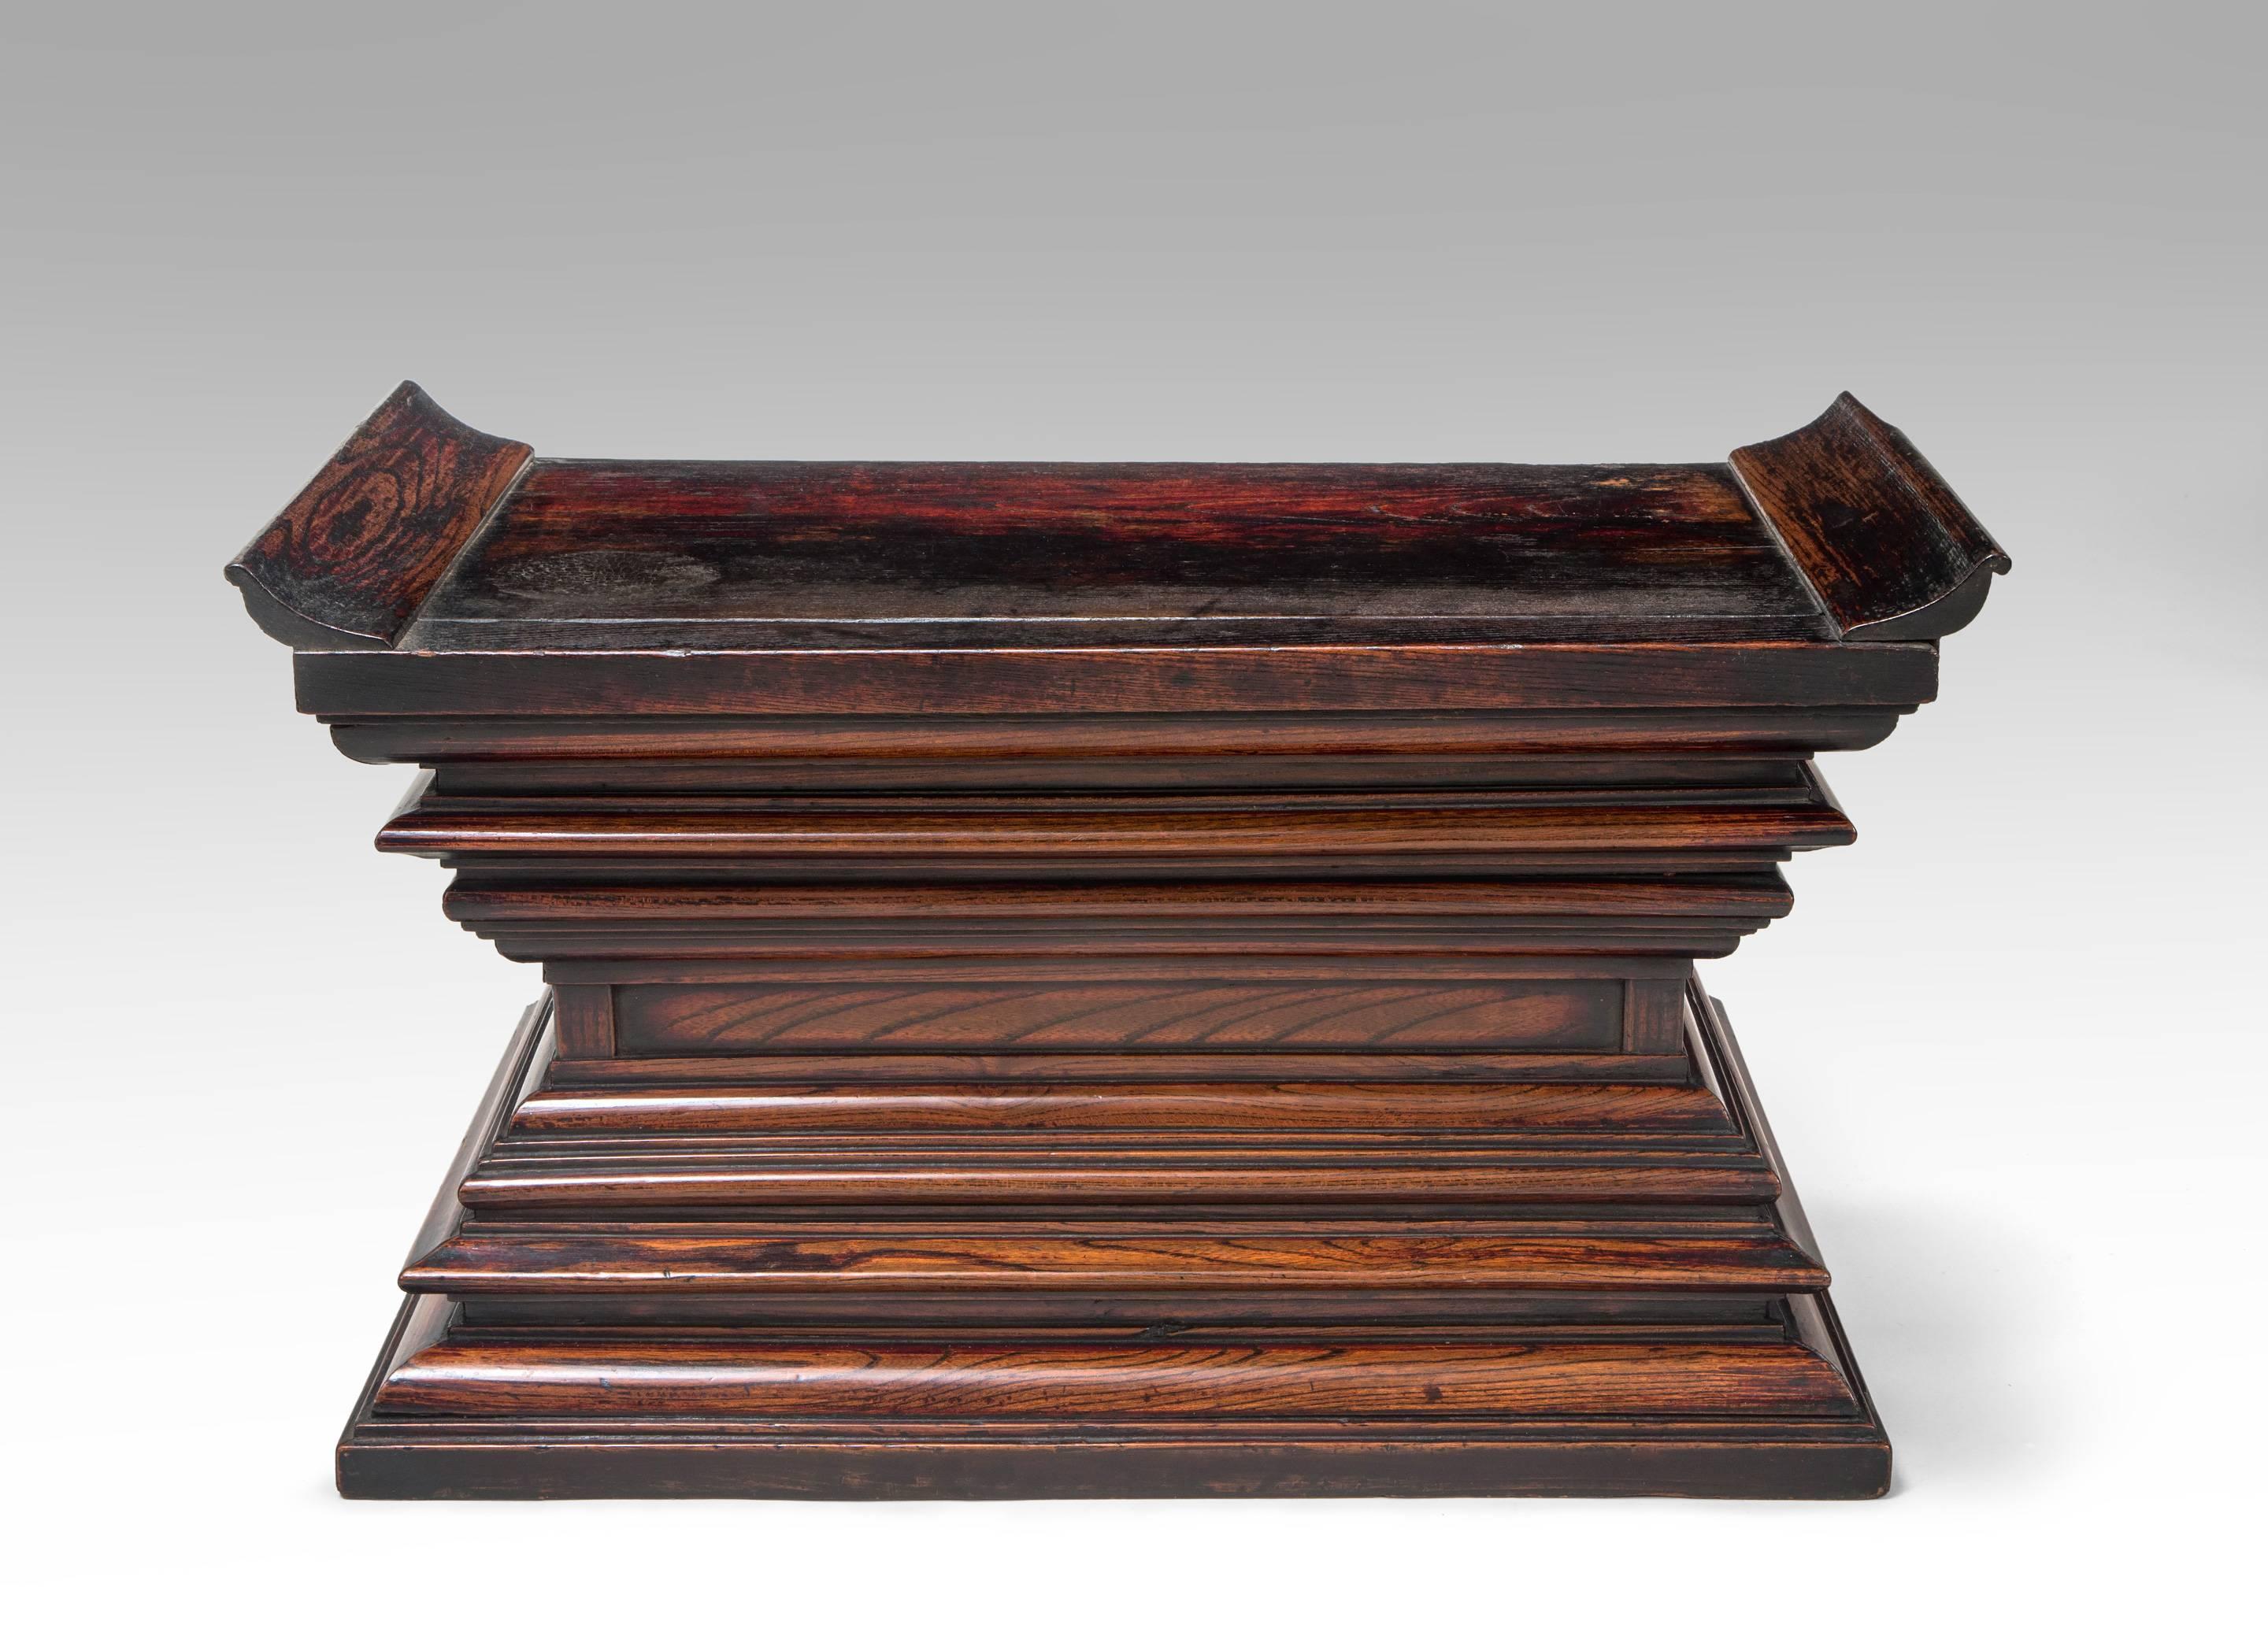 Lovely color and complex yet harmonious design altar / plinth. The rectangular platform with upturned ends, above the stepped waisted plinth, the back open. Shows signs of use and age, in overall very good condition.